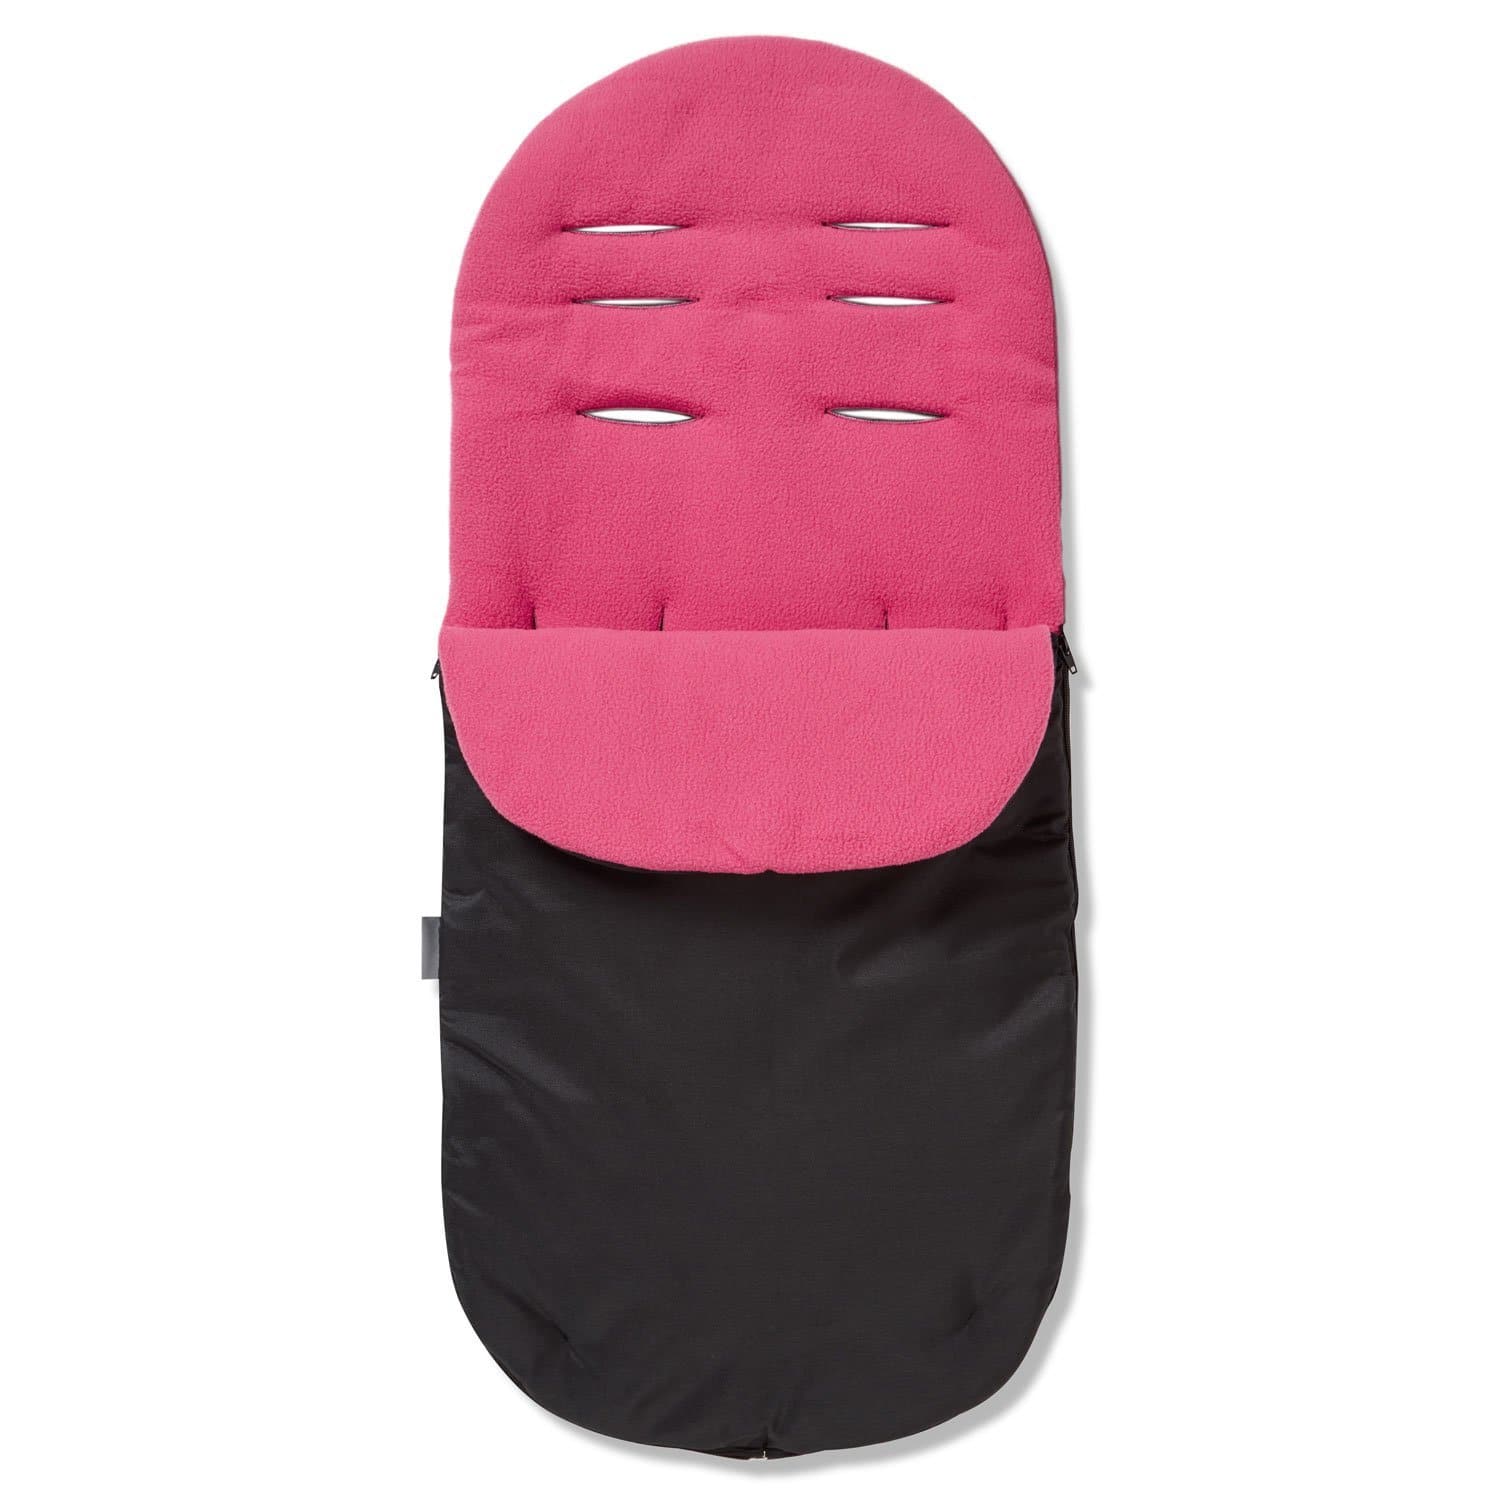 Footmuff / Cosy Toes Compatible with Mamas & Papas - Dark Pink / Fits All Models | For Your Little One